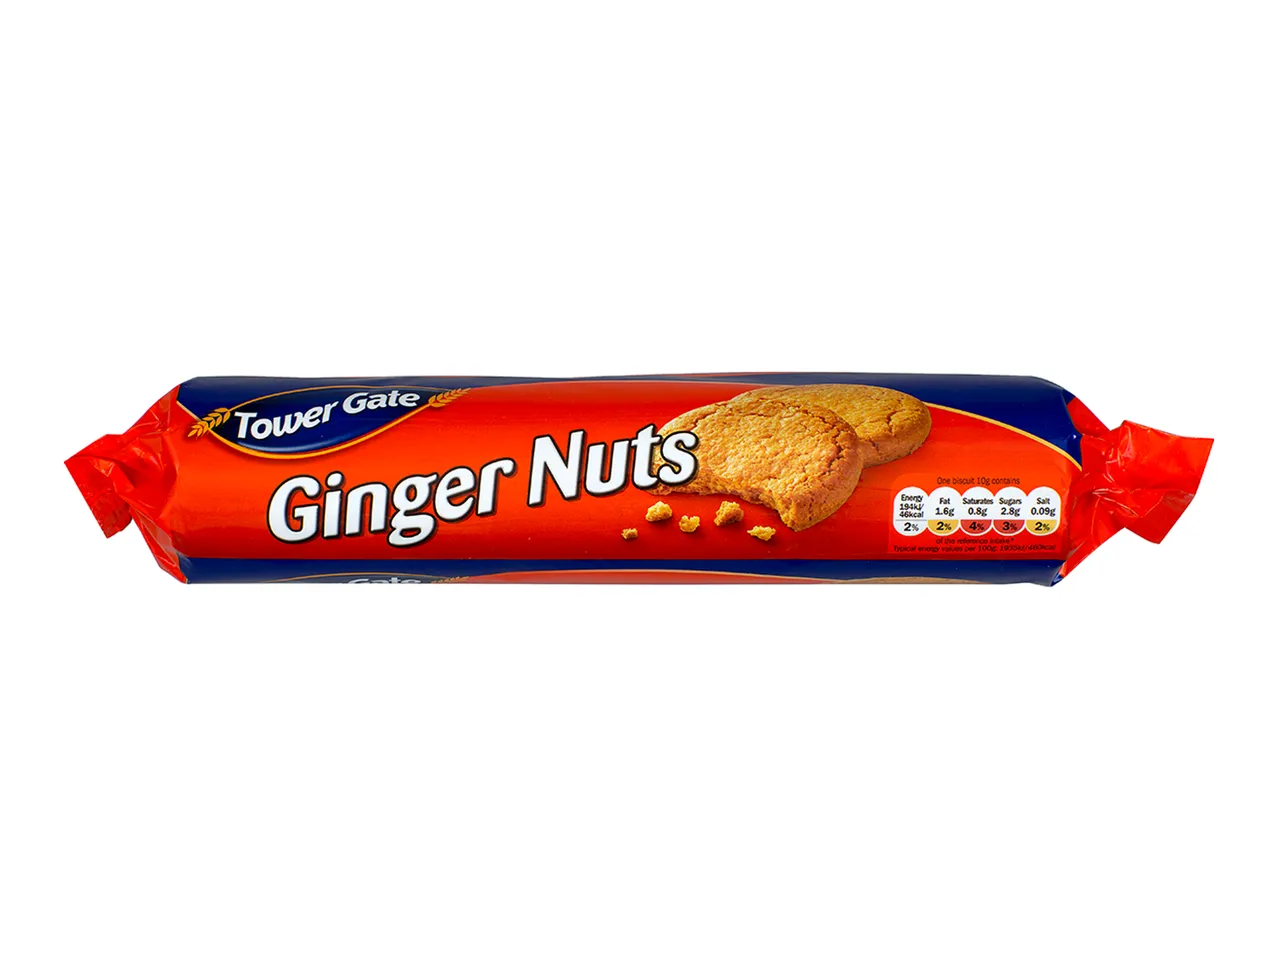 Go to full screen view: Tower Gate Ginger Nut Biscuits - Image 1